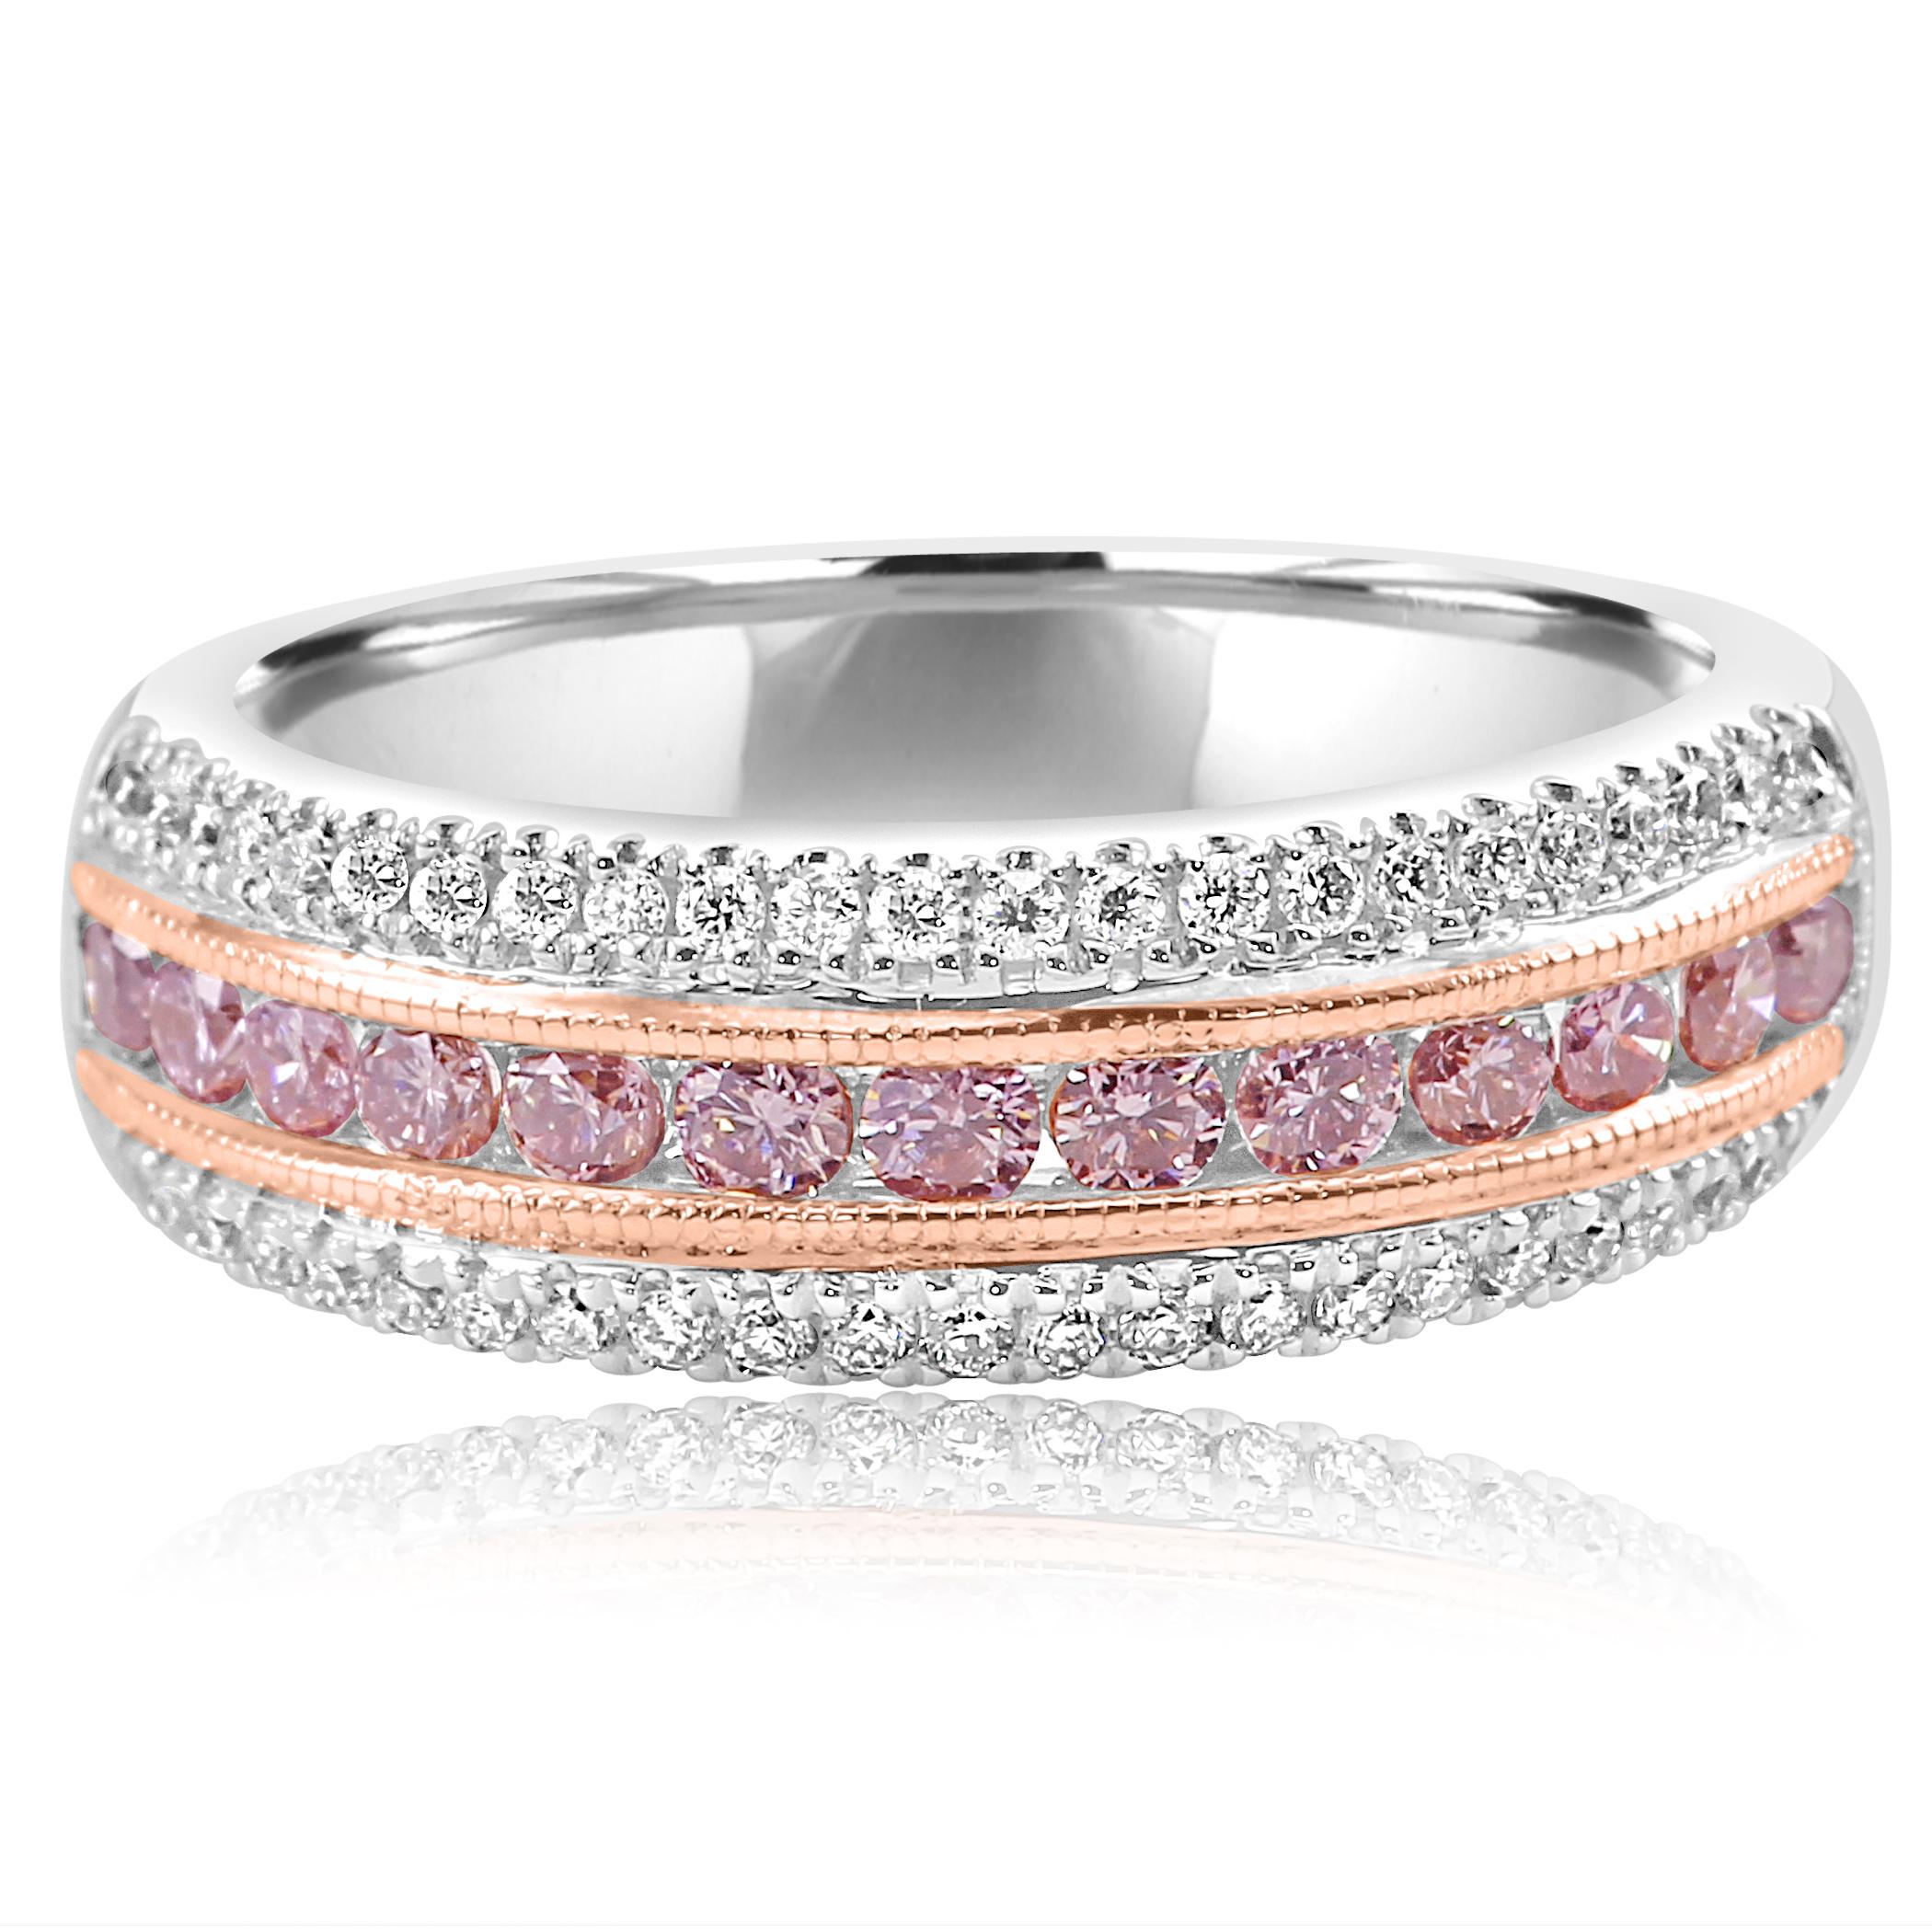 Gorgeous Natural Pink Diamonds 0.47 Carat Channel set, Flanked By Two Rows of White Diamond Round on the Sides 0.28 Carat  in 18K White and Rose Gold Band Ring.

Pink Diamond Weight 0.47 Carat
Total  Weight 0.75 Carat